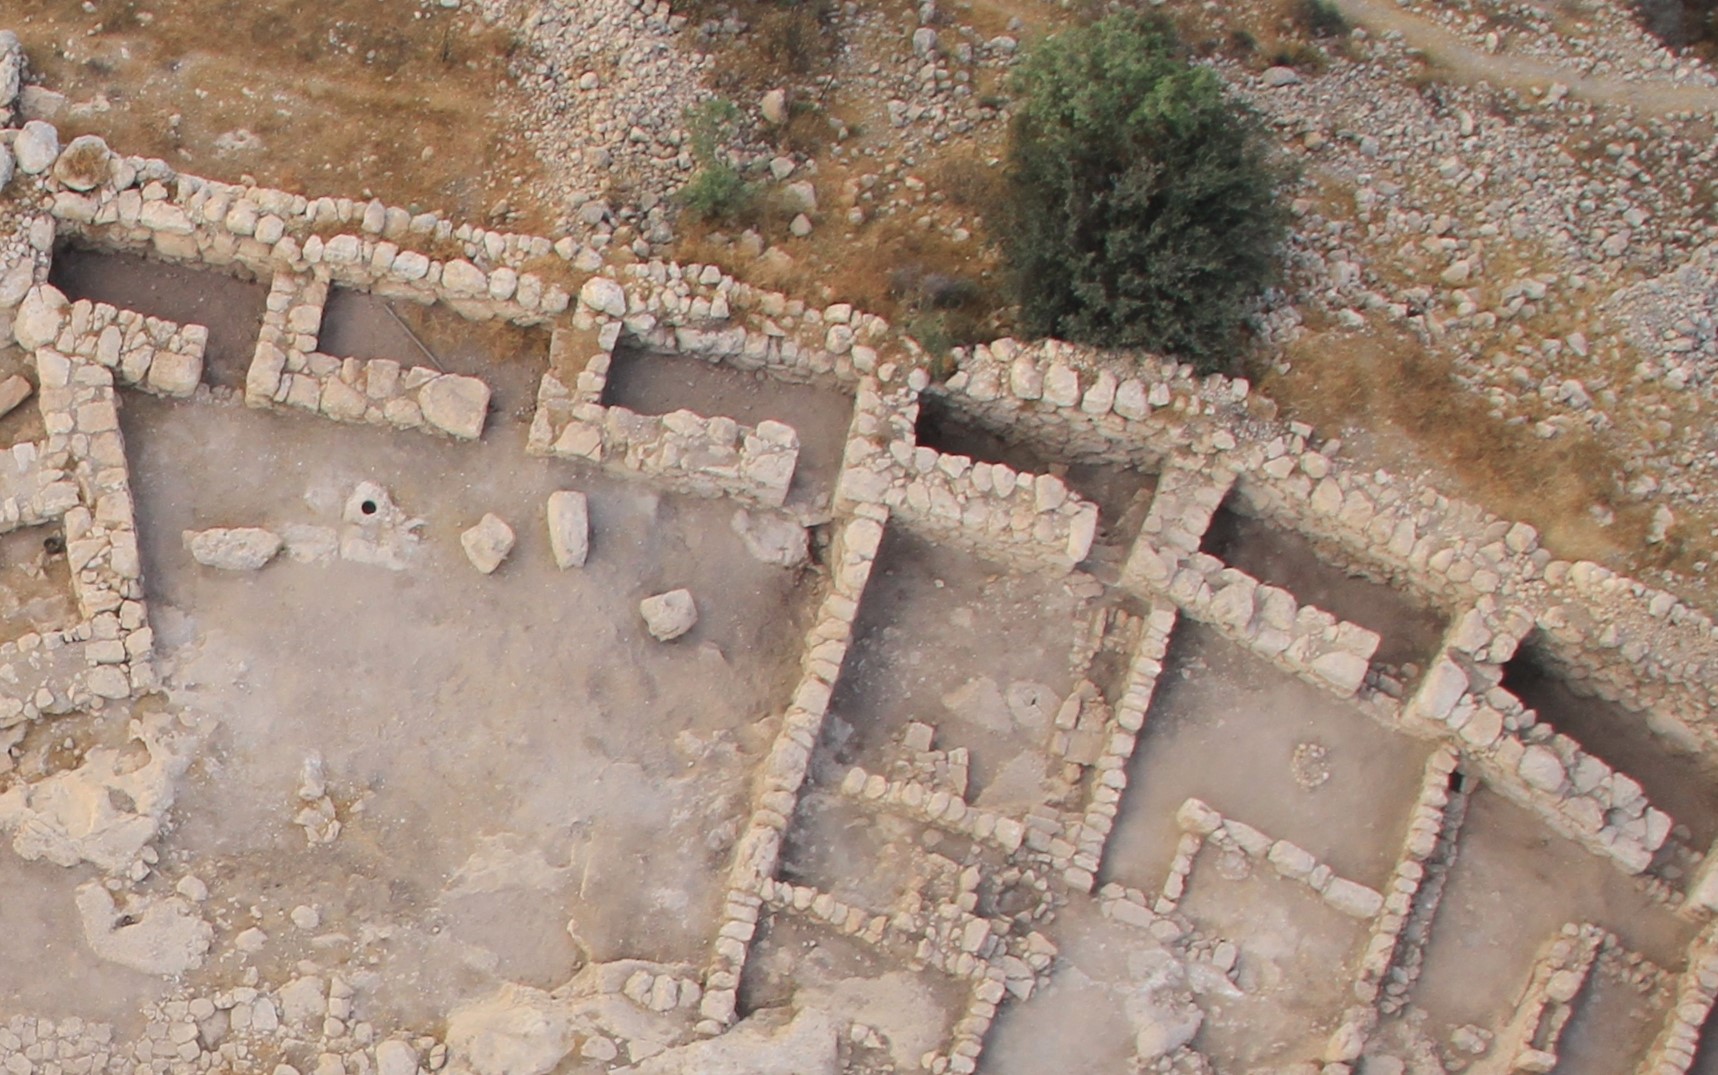 Web of biblical cities depicts King David as major ruler, says Israeli  archaeologist